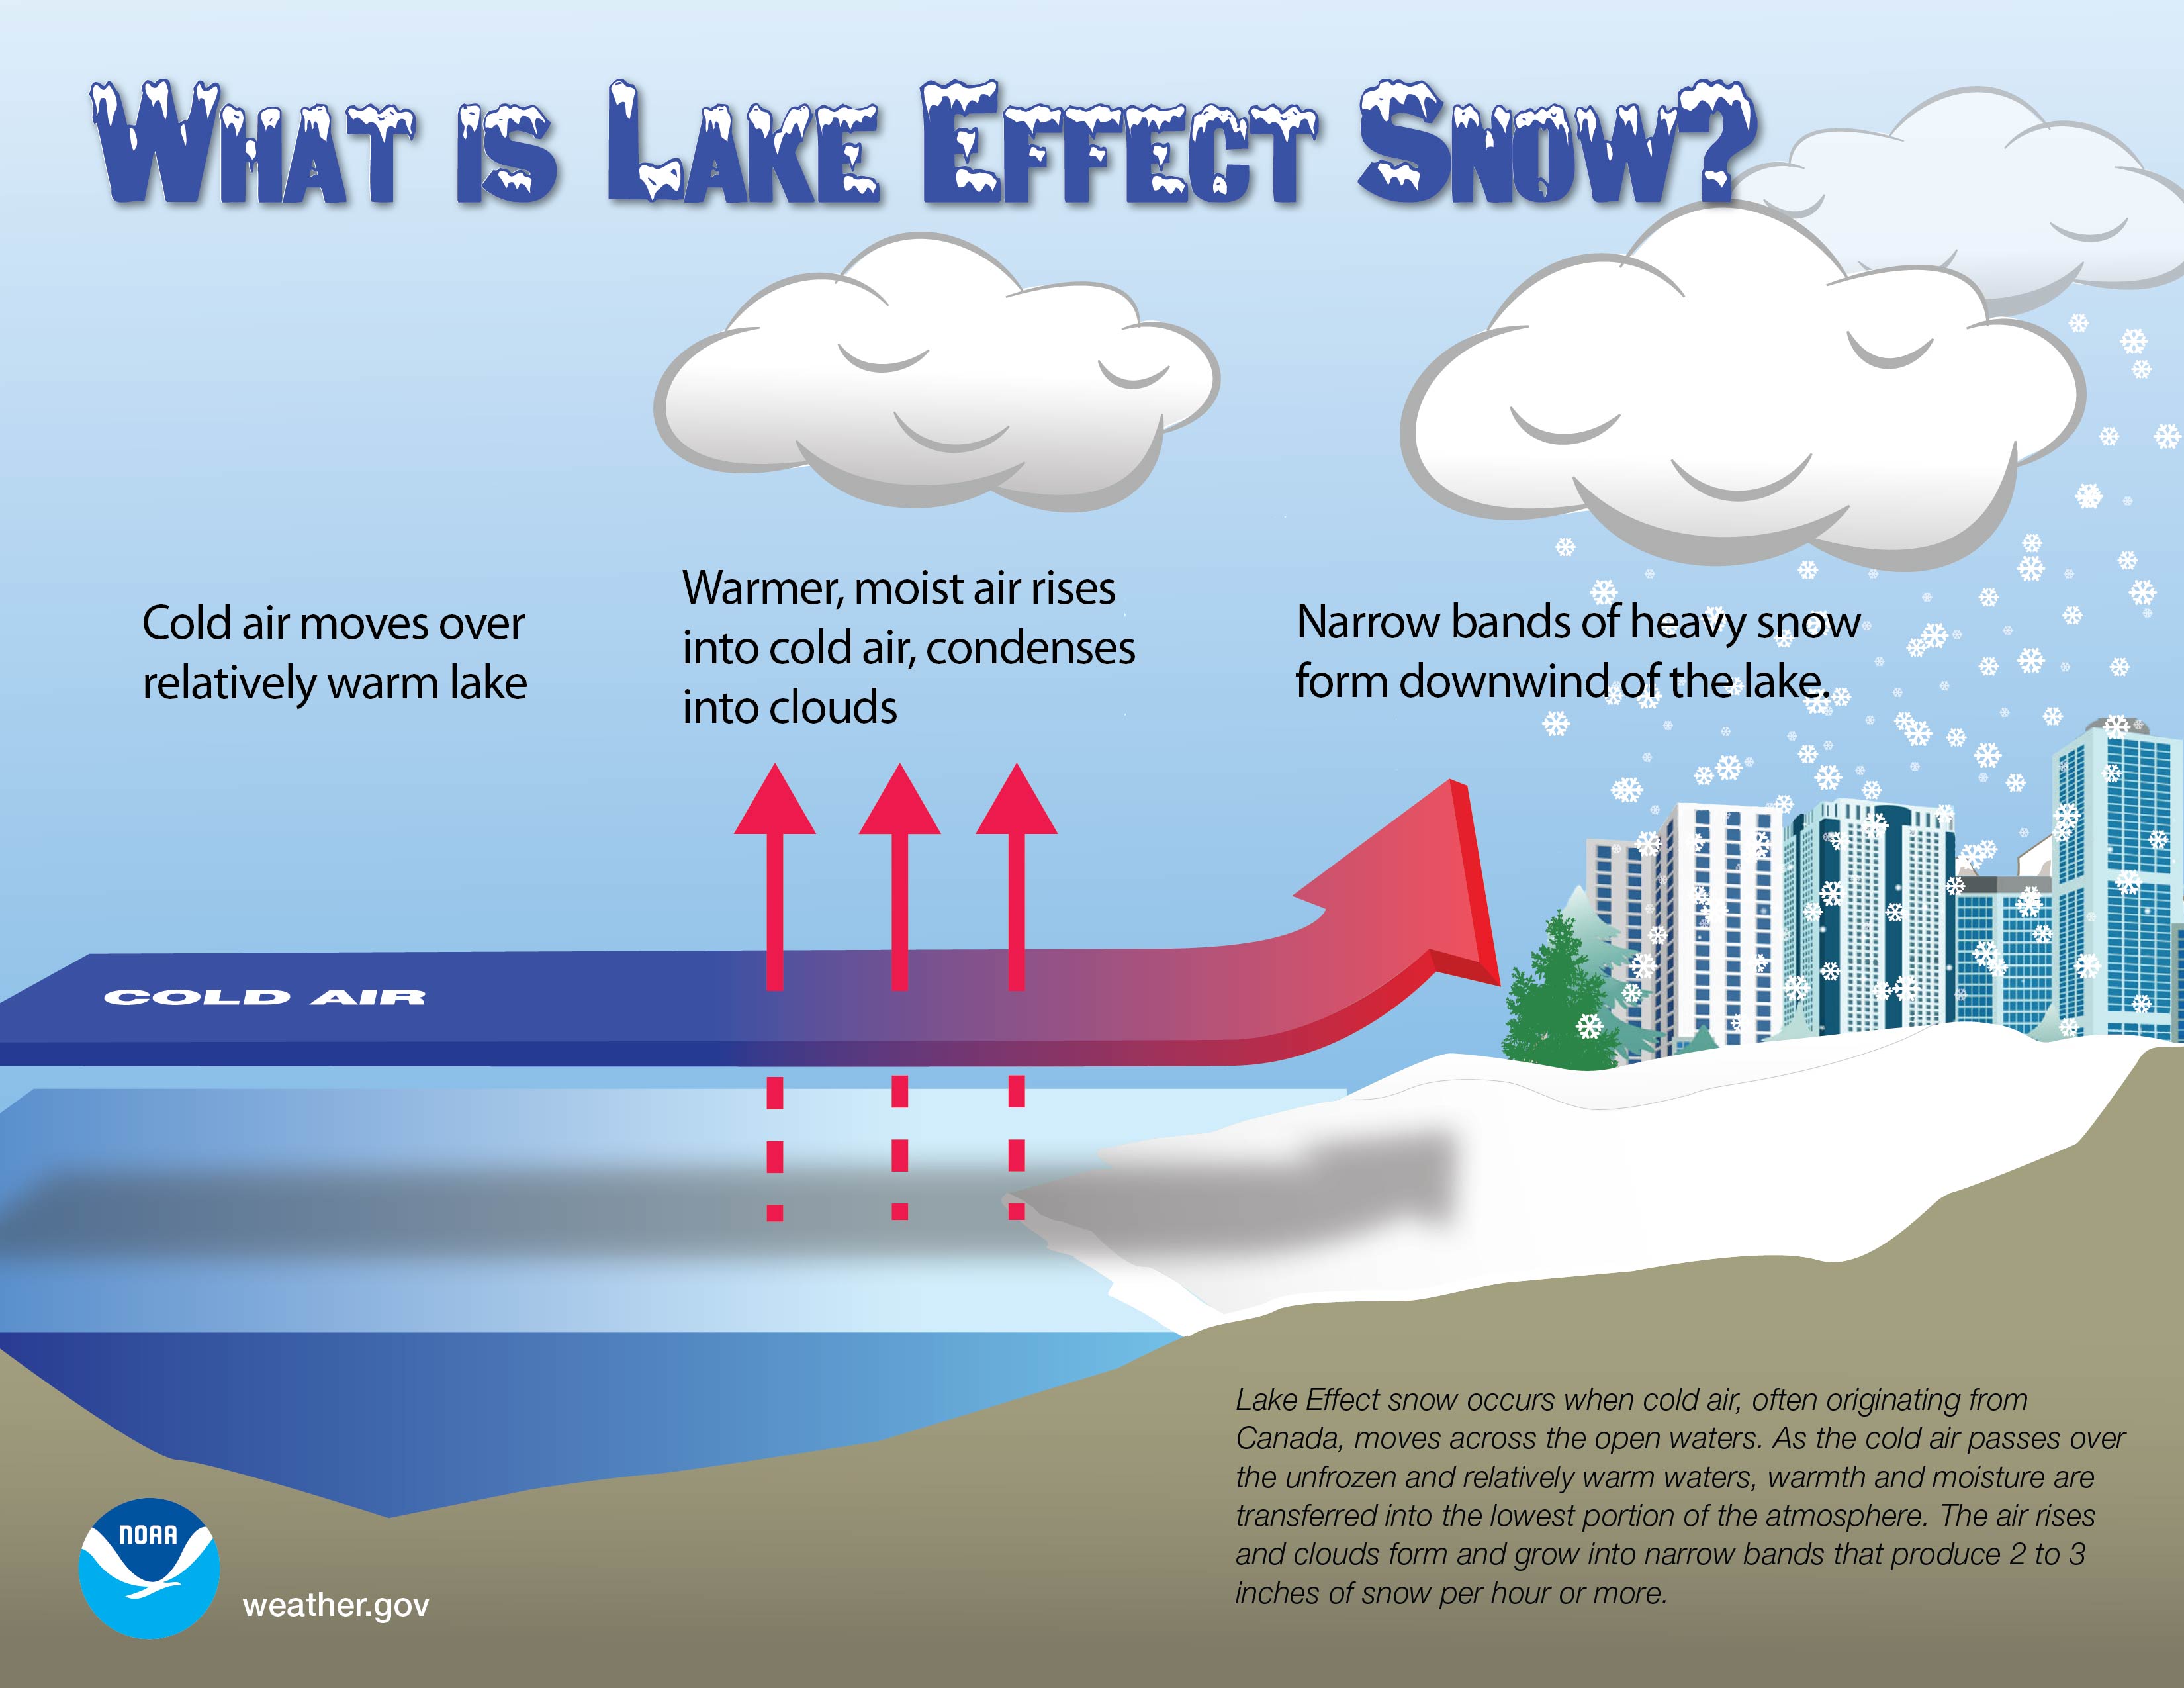 What is lake effect snow? Lake effect snow occurs when cold air, often originating from Canada, moves across the open waters. As the cold air passes over the unfrozen and relatively warm waters, warmth and moisture are transferred into the lowest portion of the atmosphere. The air rises and clouds form and grow into narrows bands that produce 2 to 3 inches of snow per hour or more.